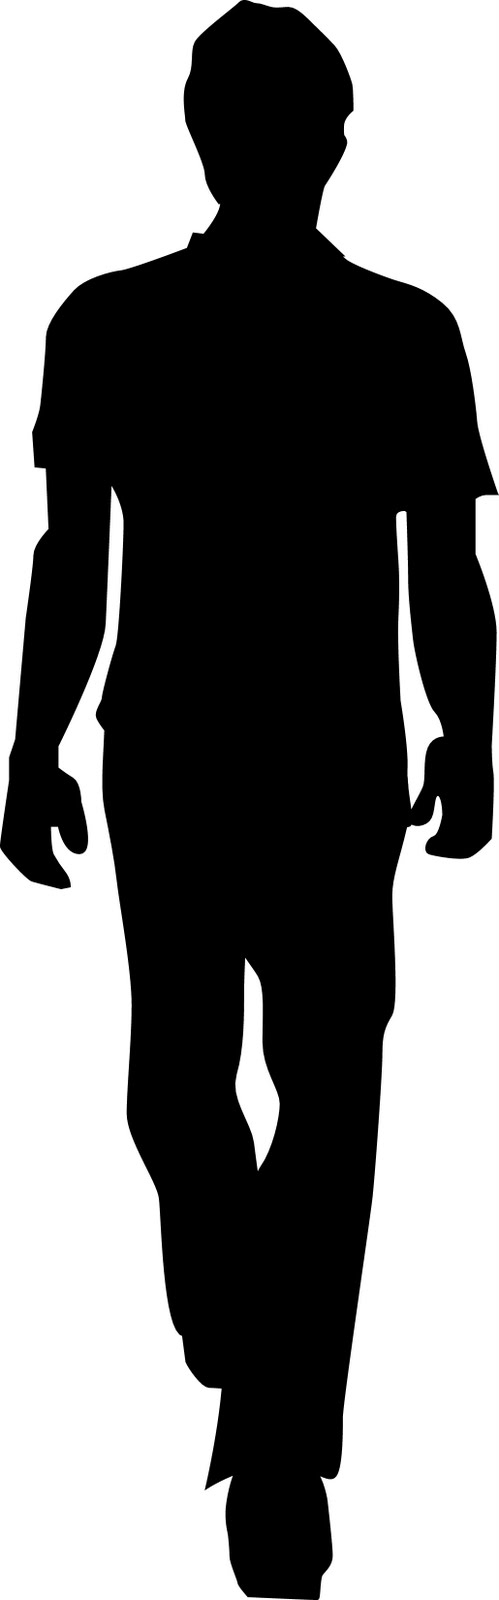 Walking Person Silhouette - Clipart library